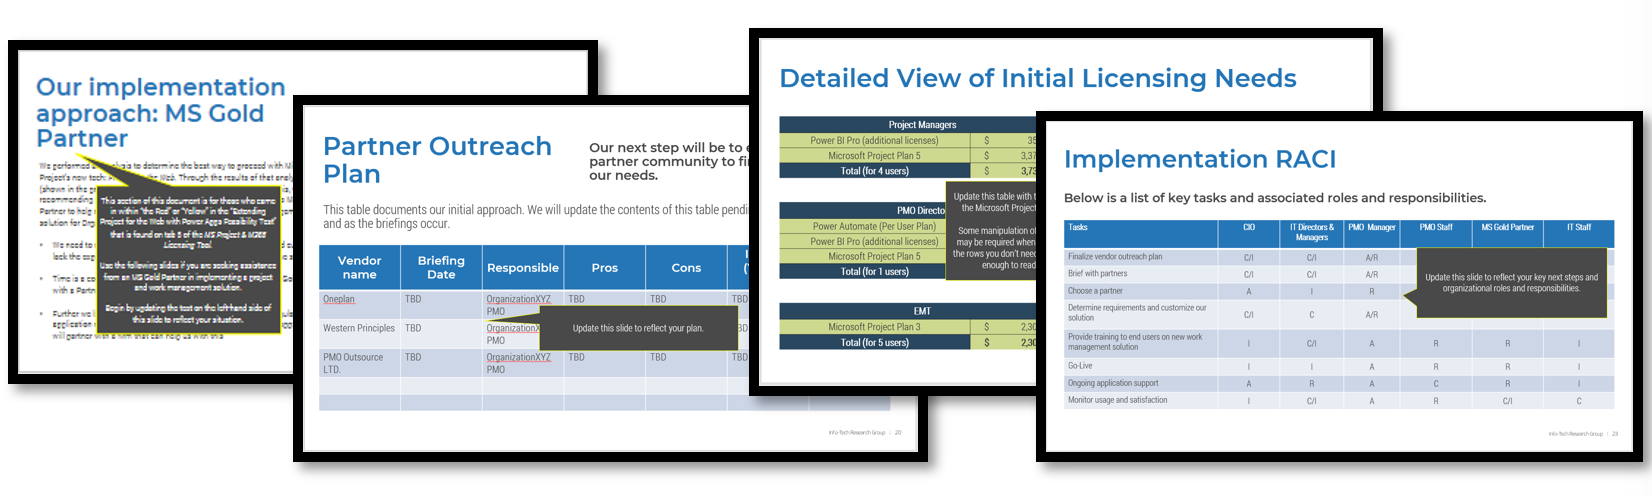 Screenshots from the 'Microsoft Project and M365 Action Plan Template' outlining the 'Microsoft Partner Implementation Route'.